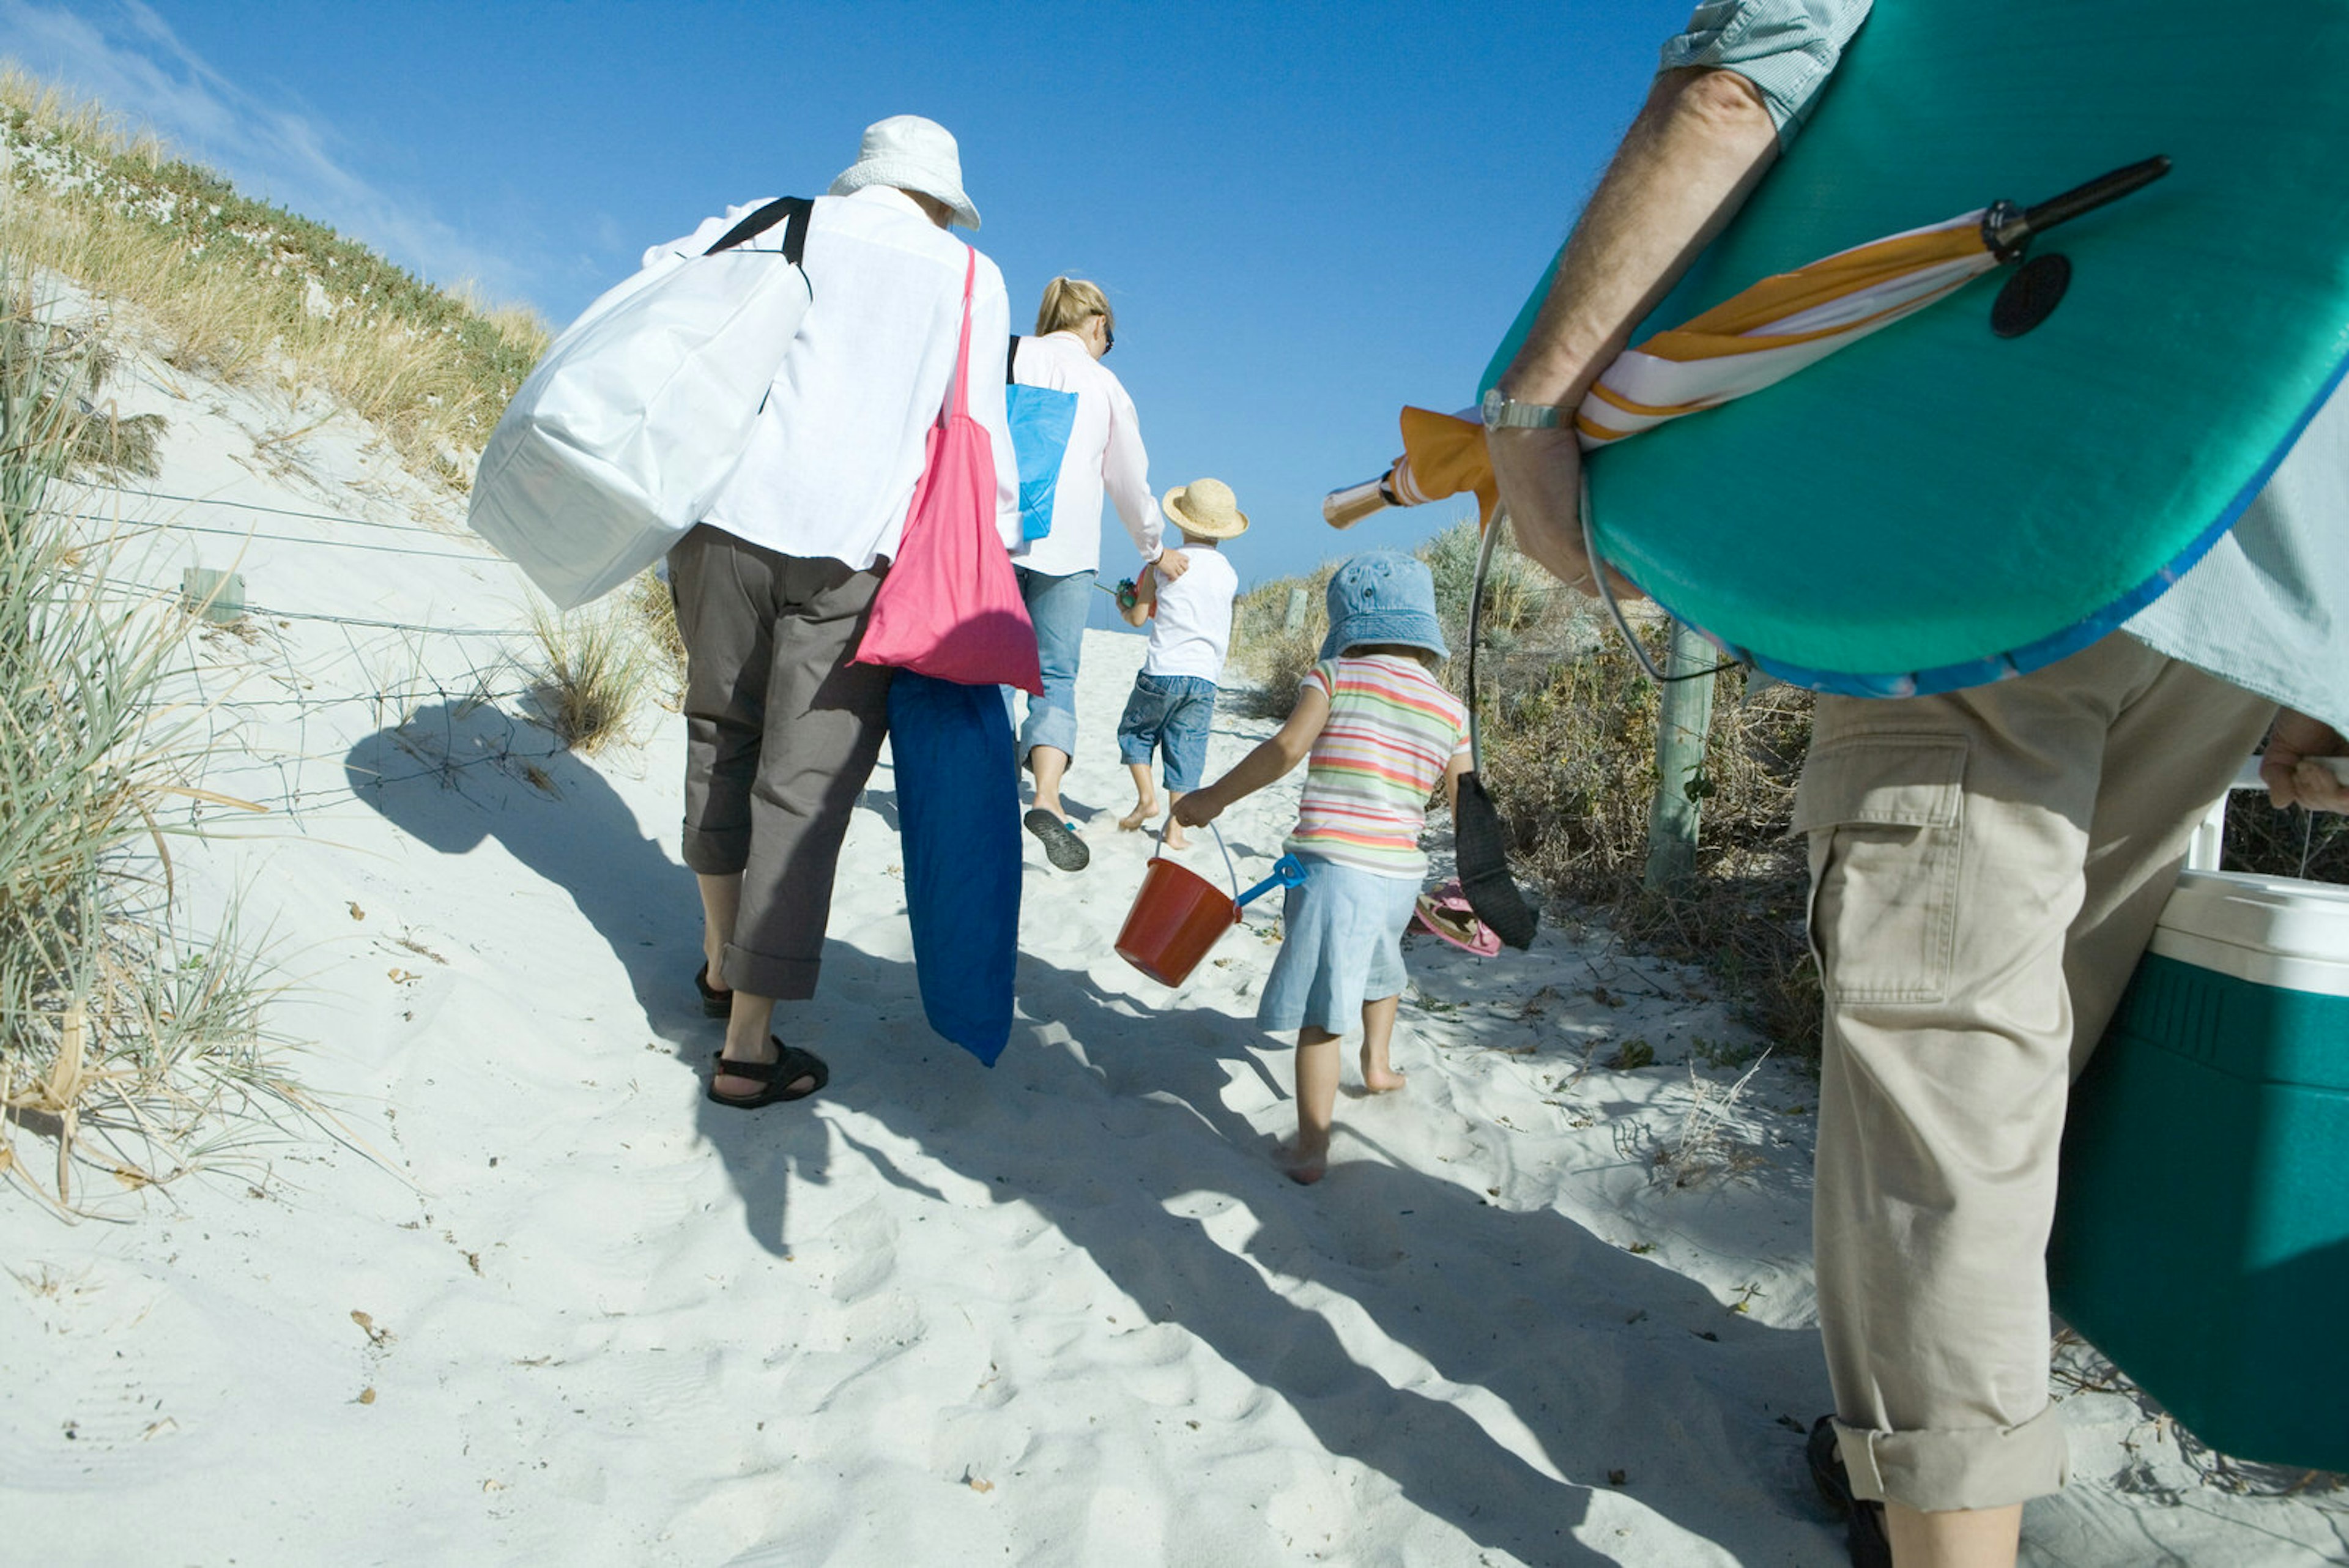 Rear view of a family group of three adults and two young children, make their way through sand dunes carrying a lot of beach items